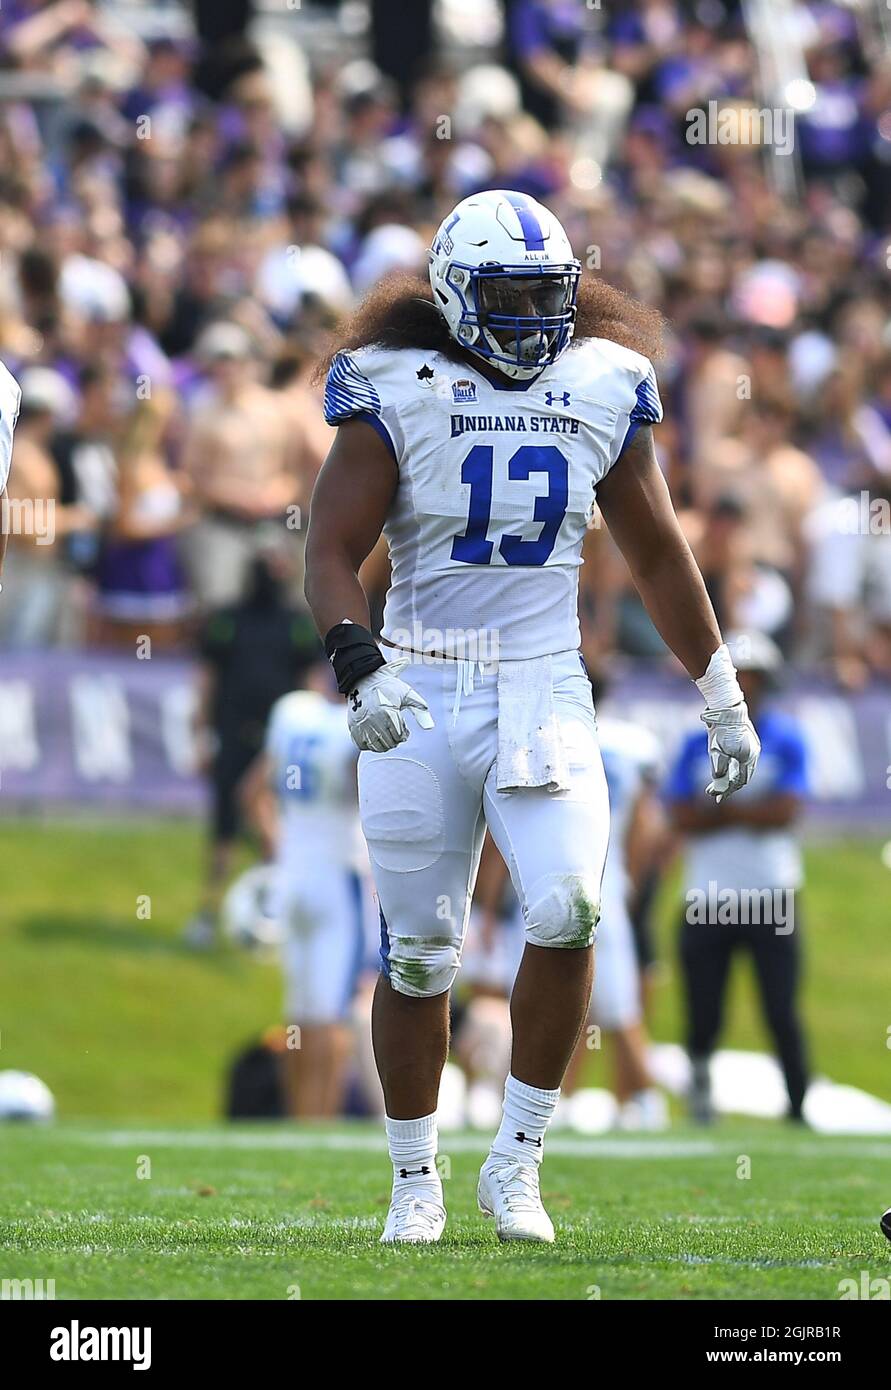 Evanston, Illinois, USA. 11th Sep, 2021. Inoke Moala #13 of the Indiana State Sycamores in action during the NCAA football game between the Northwestern Wildcats vs Indiana State Sycamores at Ryan Field in Evanston, Illinois. Dean Reid/CSM/Alamy Live News Stock Photo